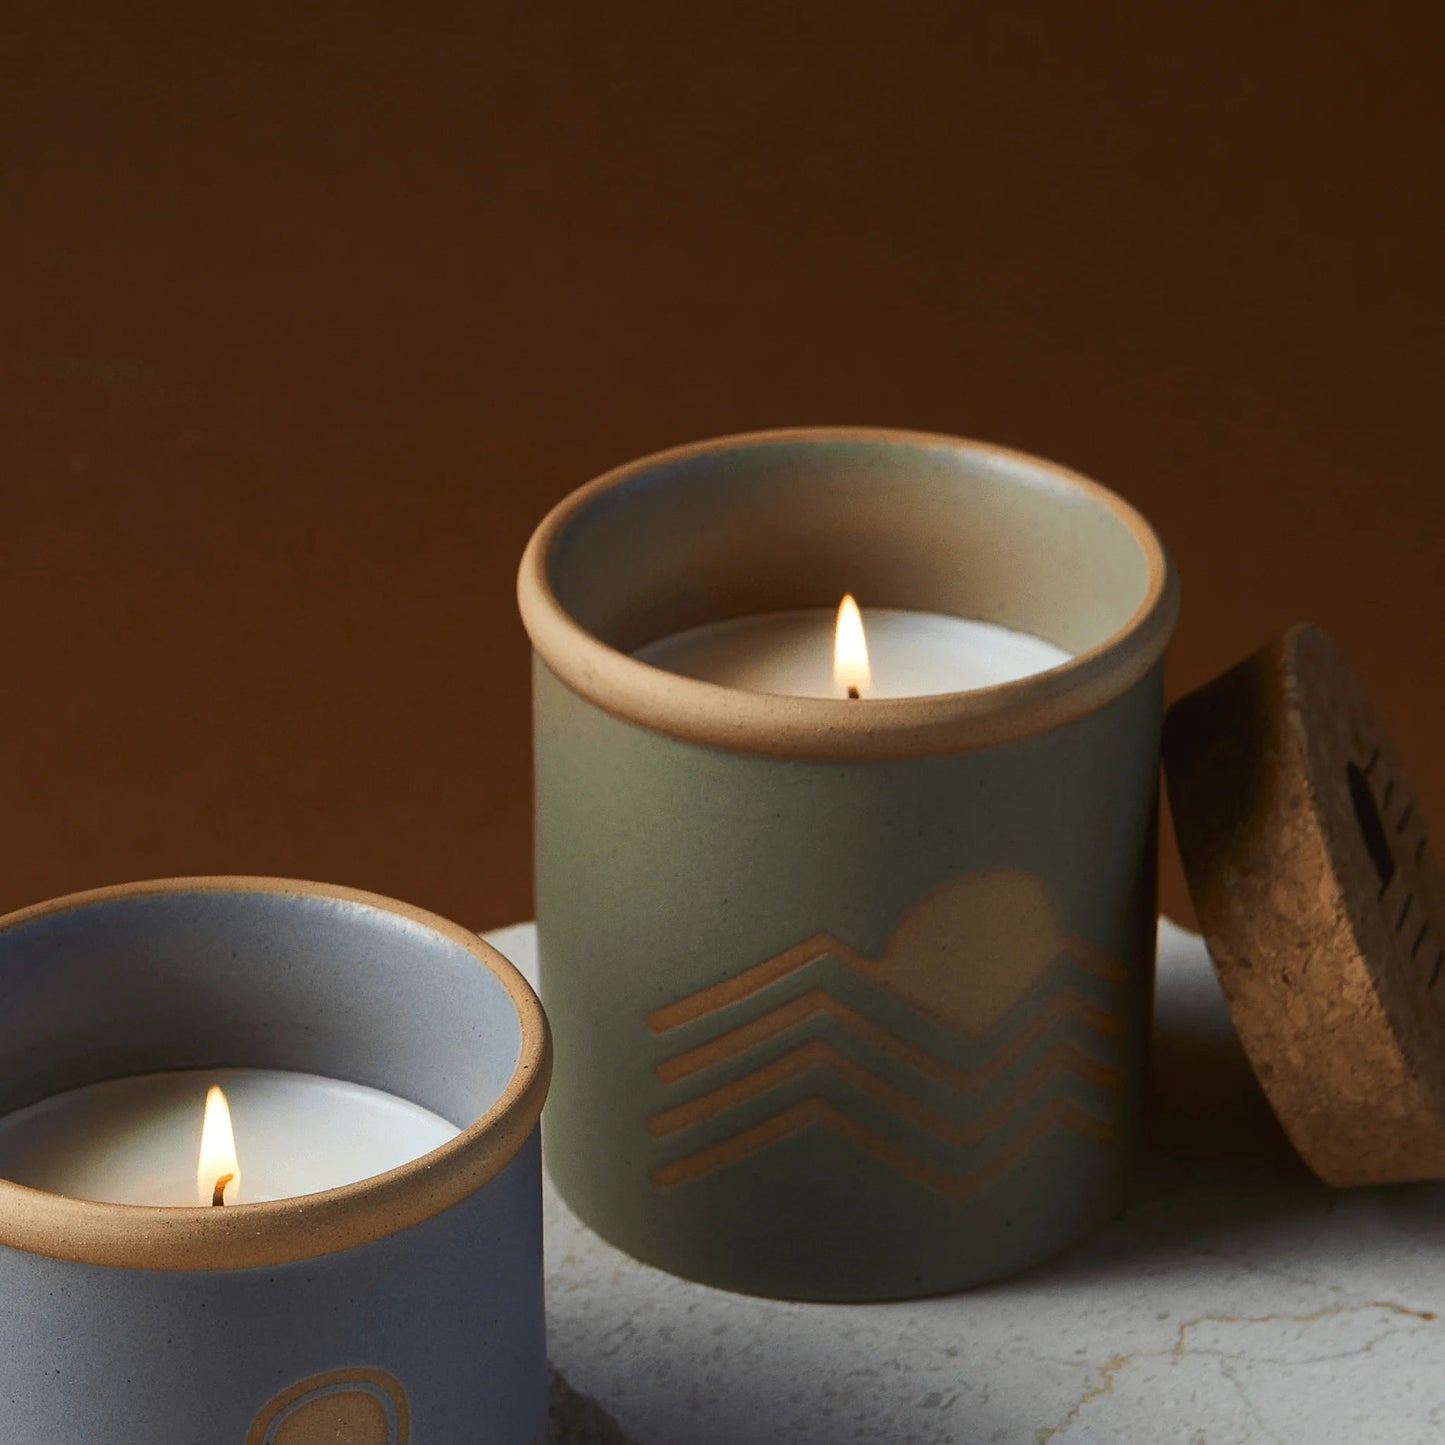 Dune Ceramic Candle - The Riviera Towel Company